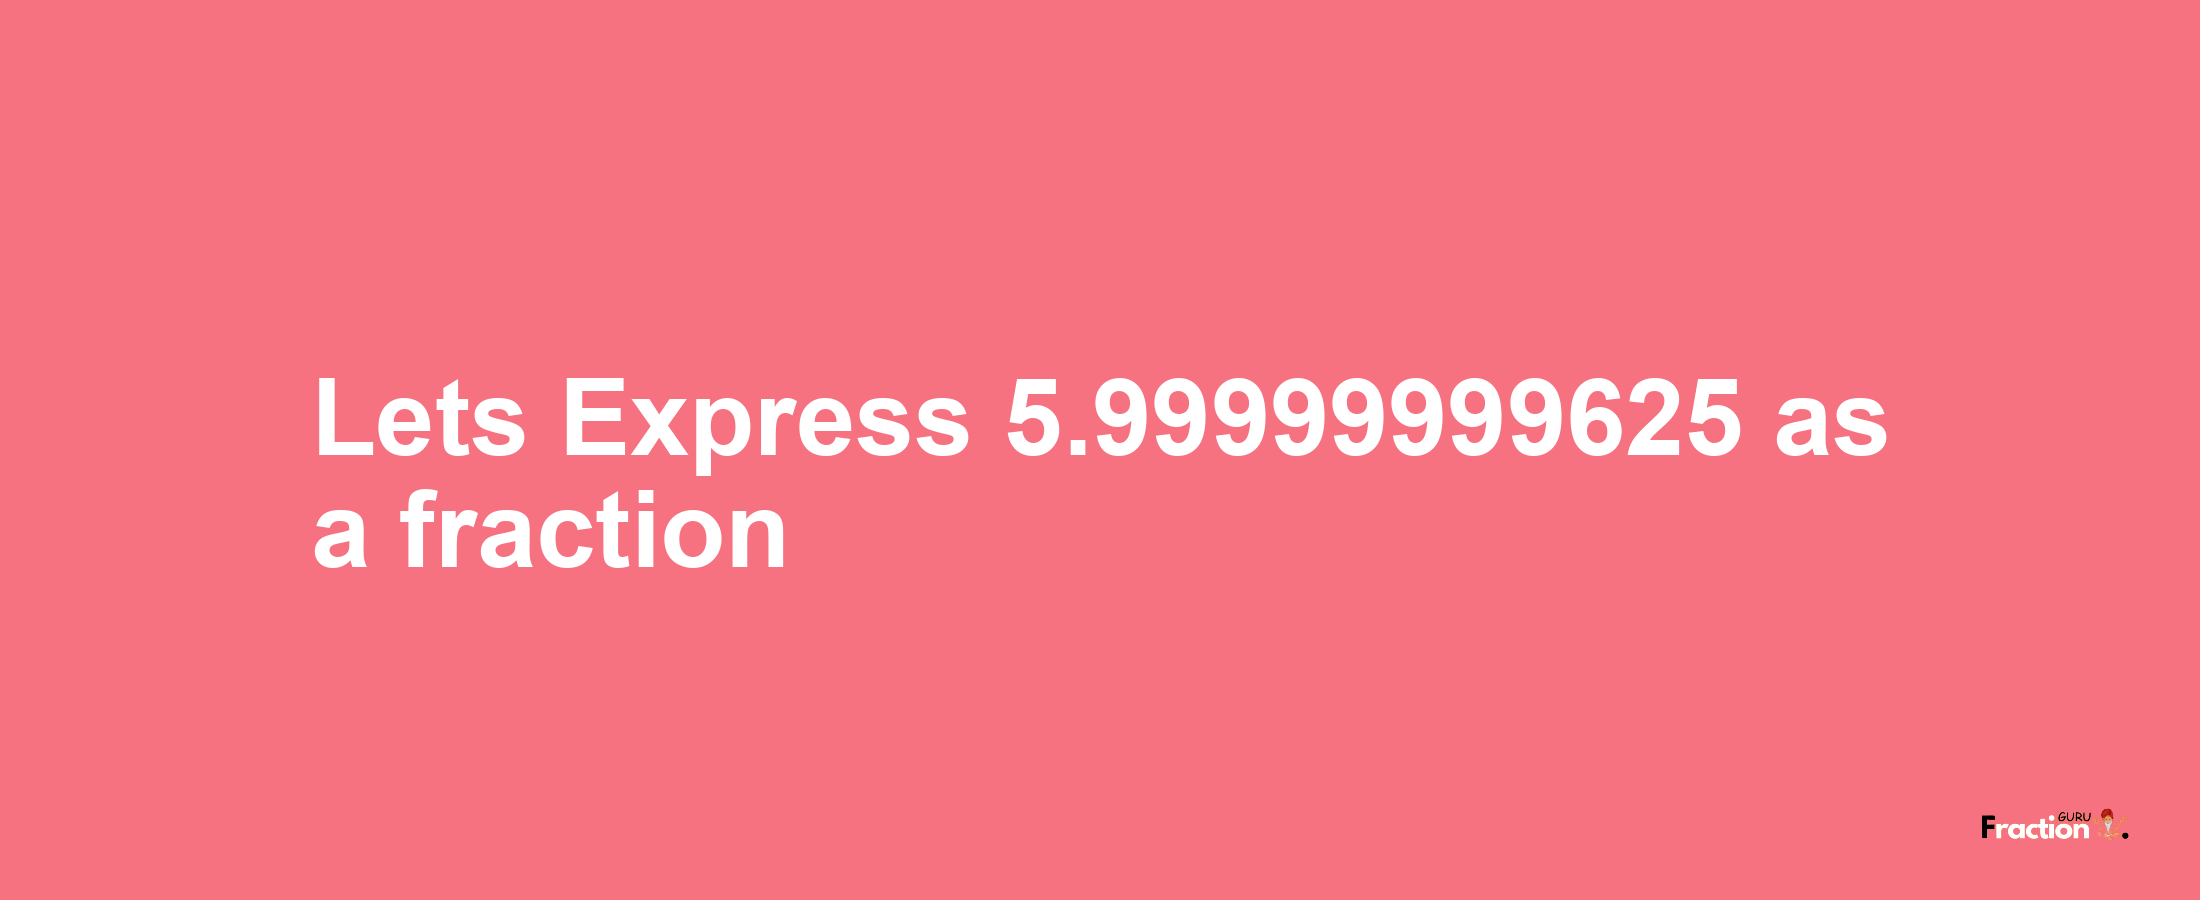 Lets Express 5.99999999625 as afraction